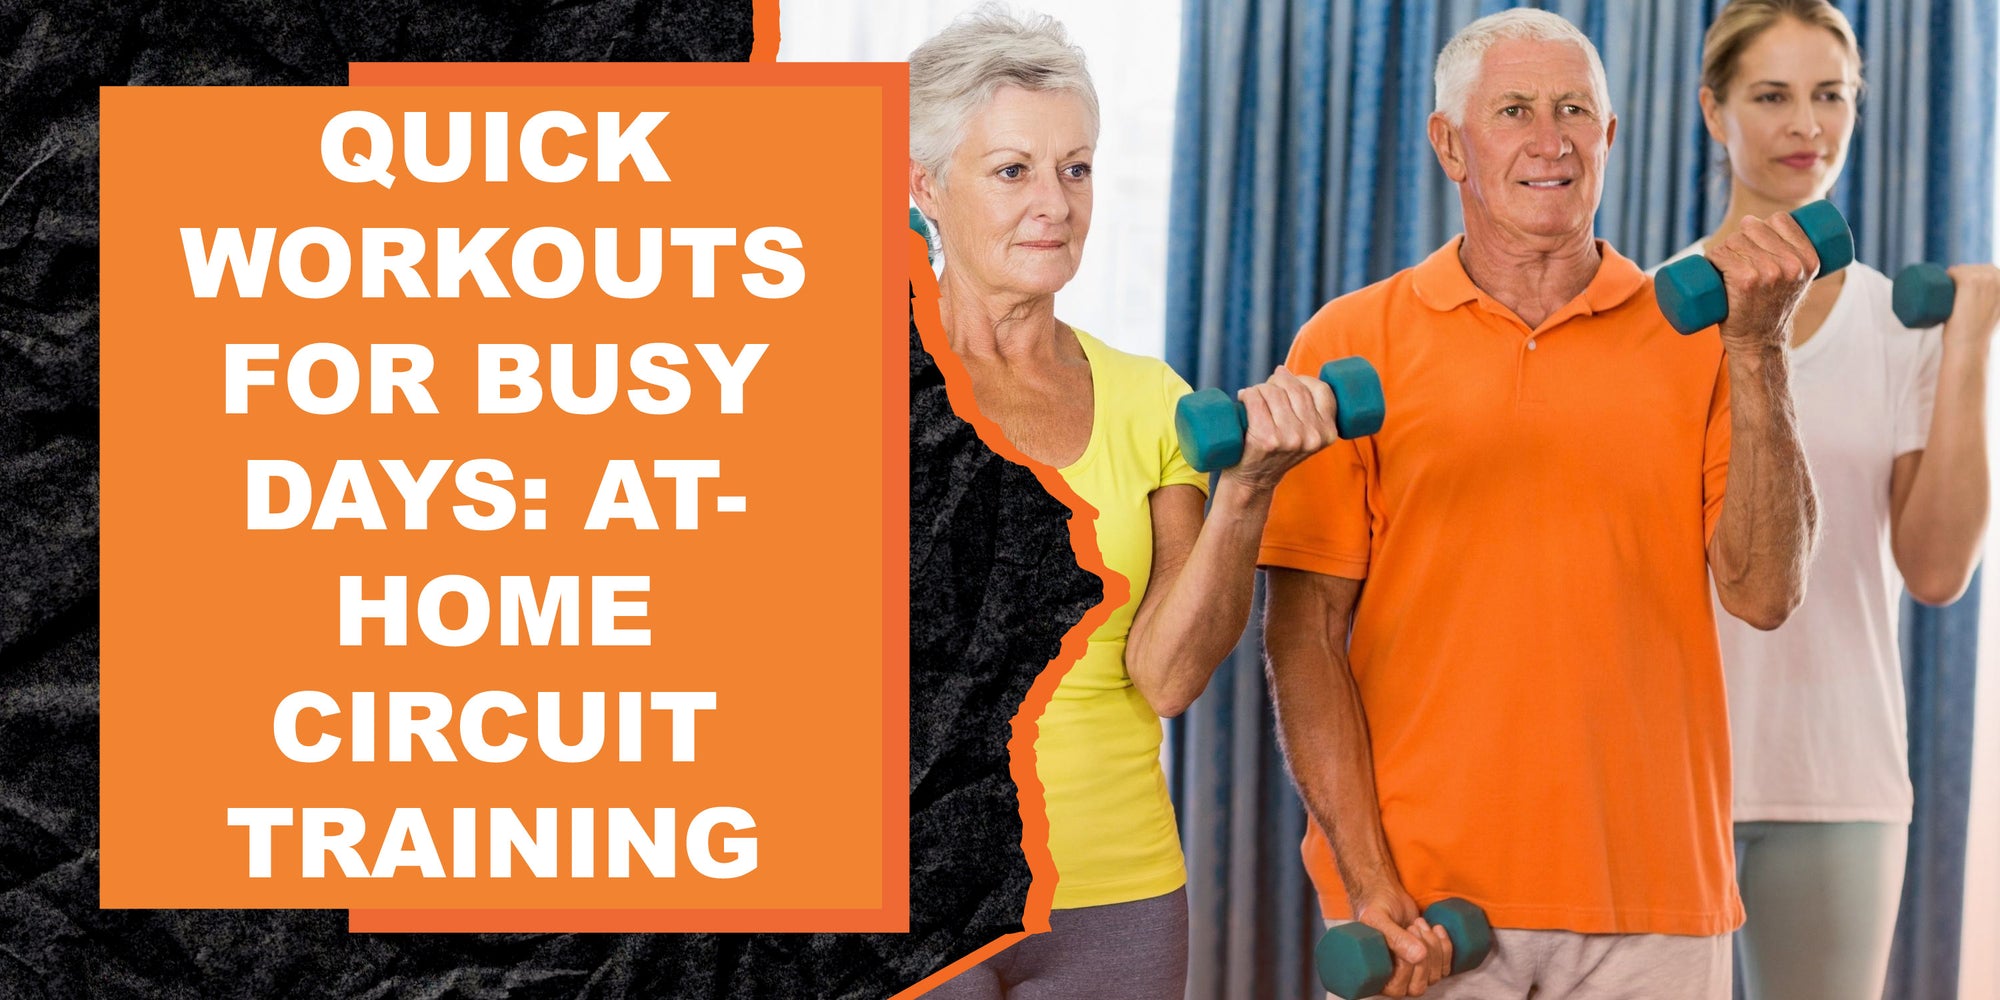 Quick Workouts for Busy Days: At-Home Circuit Training